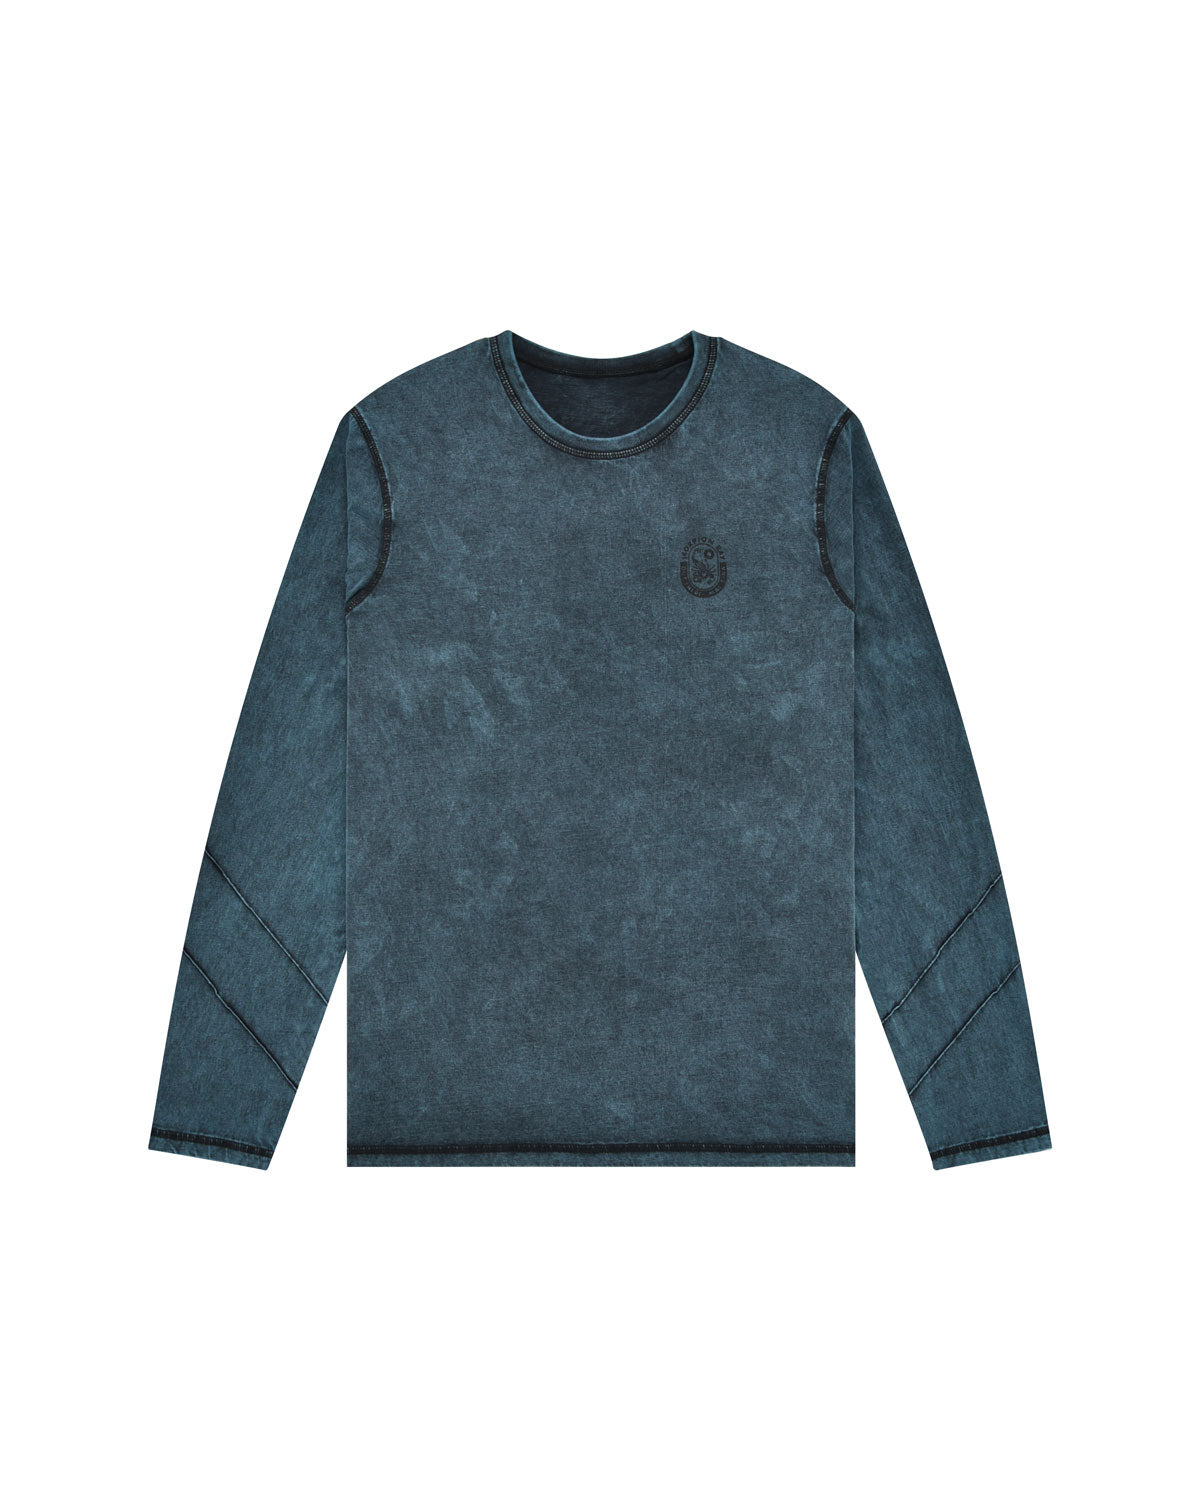 Man | Washed Doubleface Long Sleeve T-Shirt With “Dept De Surfismo” Print